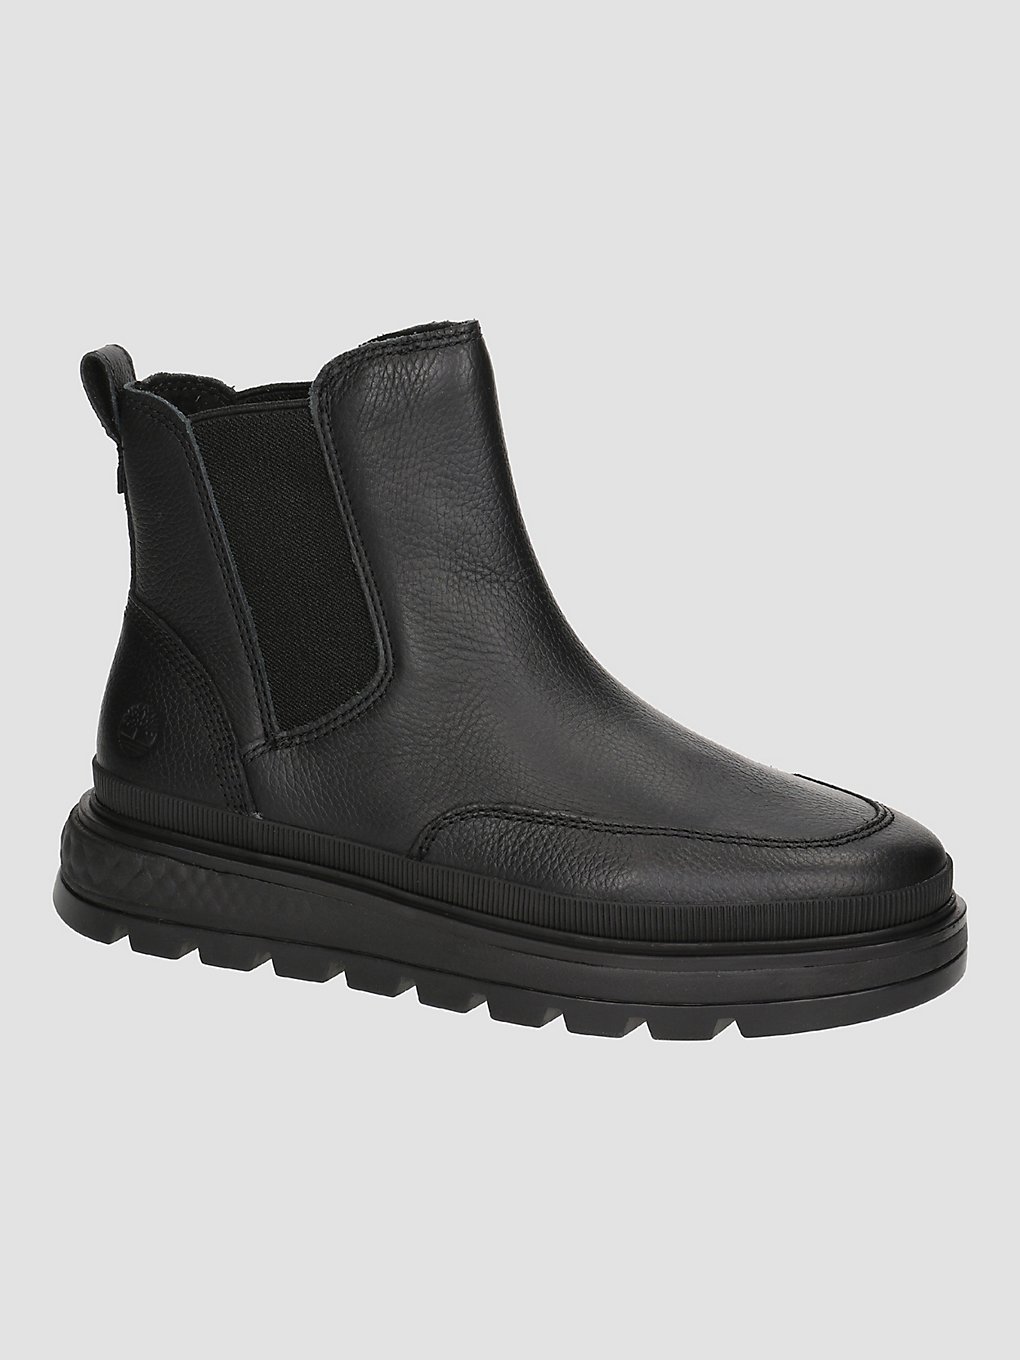 Timberland Ray City Chelsea Boots jet black